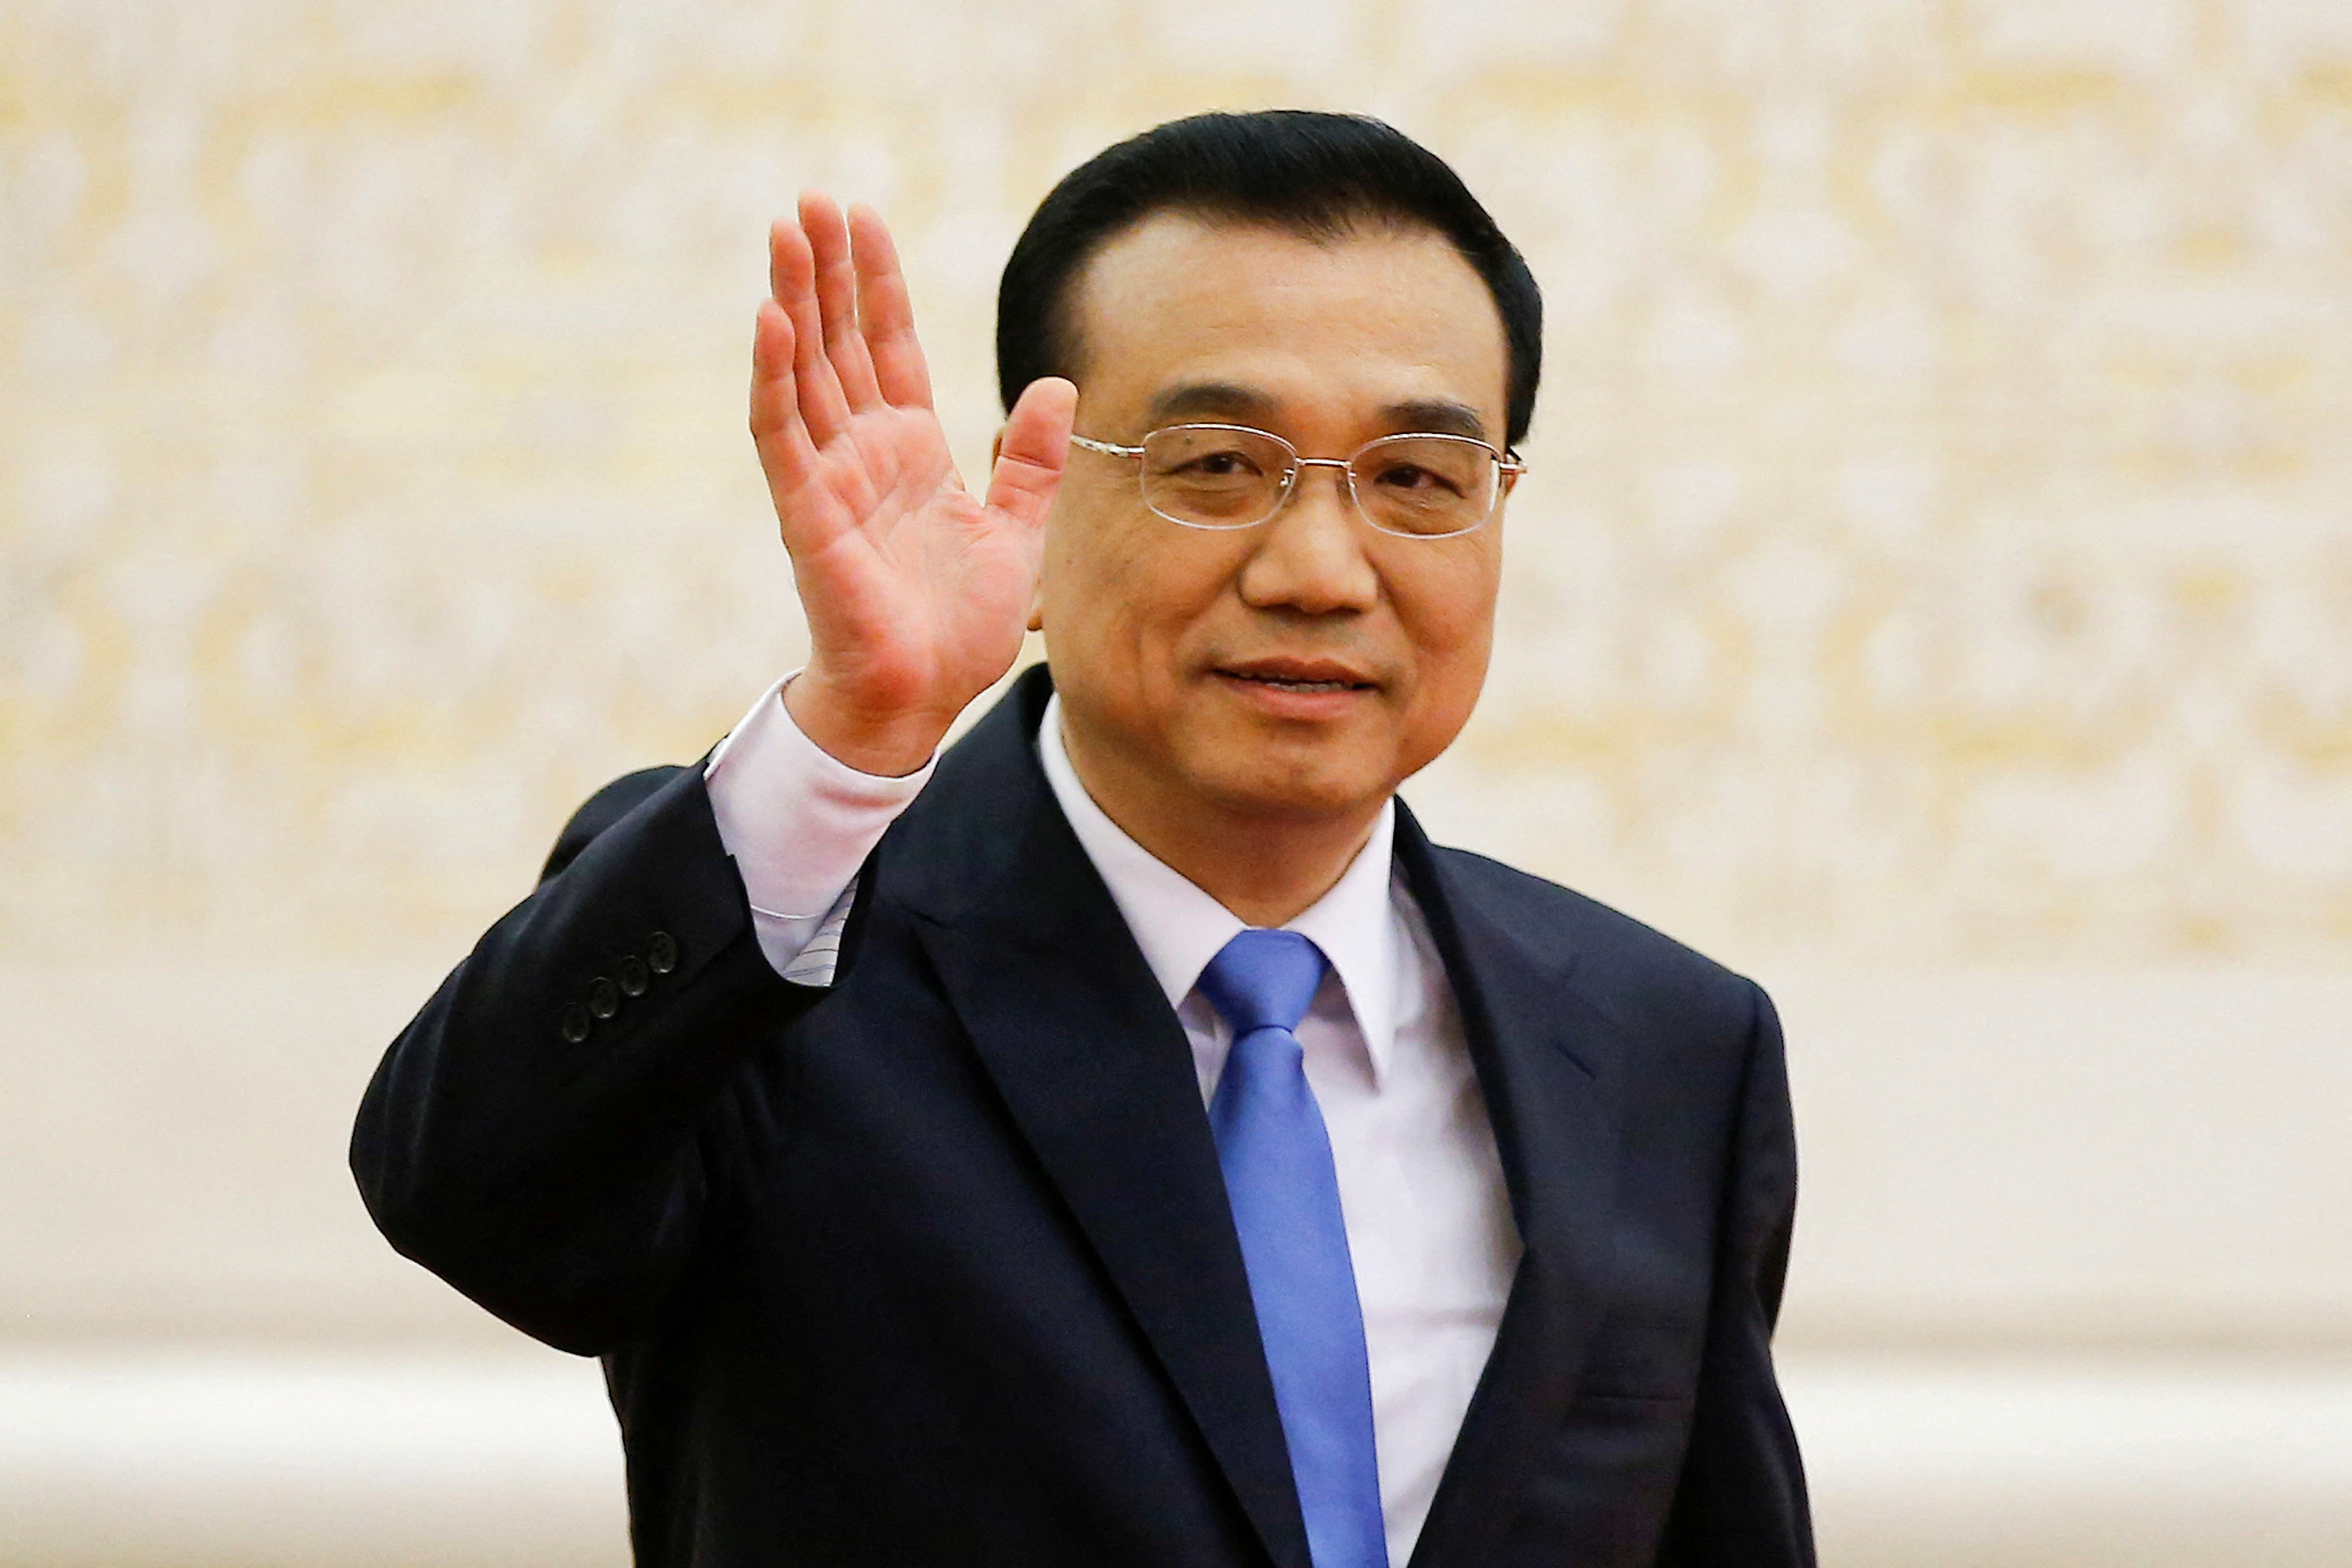 China's Premier Li Keqiang waves as he arrives for a news conference after the closing ceremony of China's National People's Congress (NPC) at the Great Hall of the People in Beijing